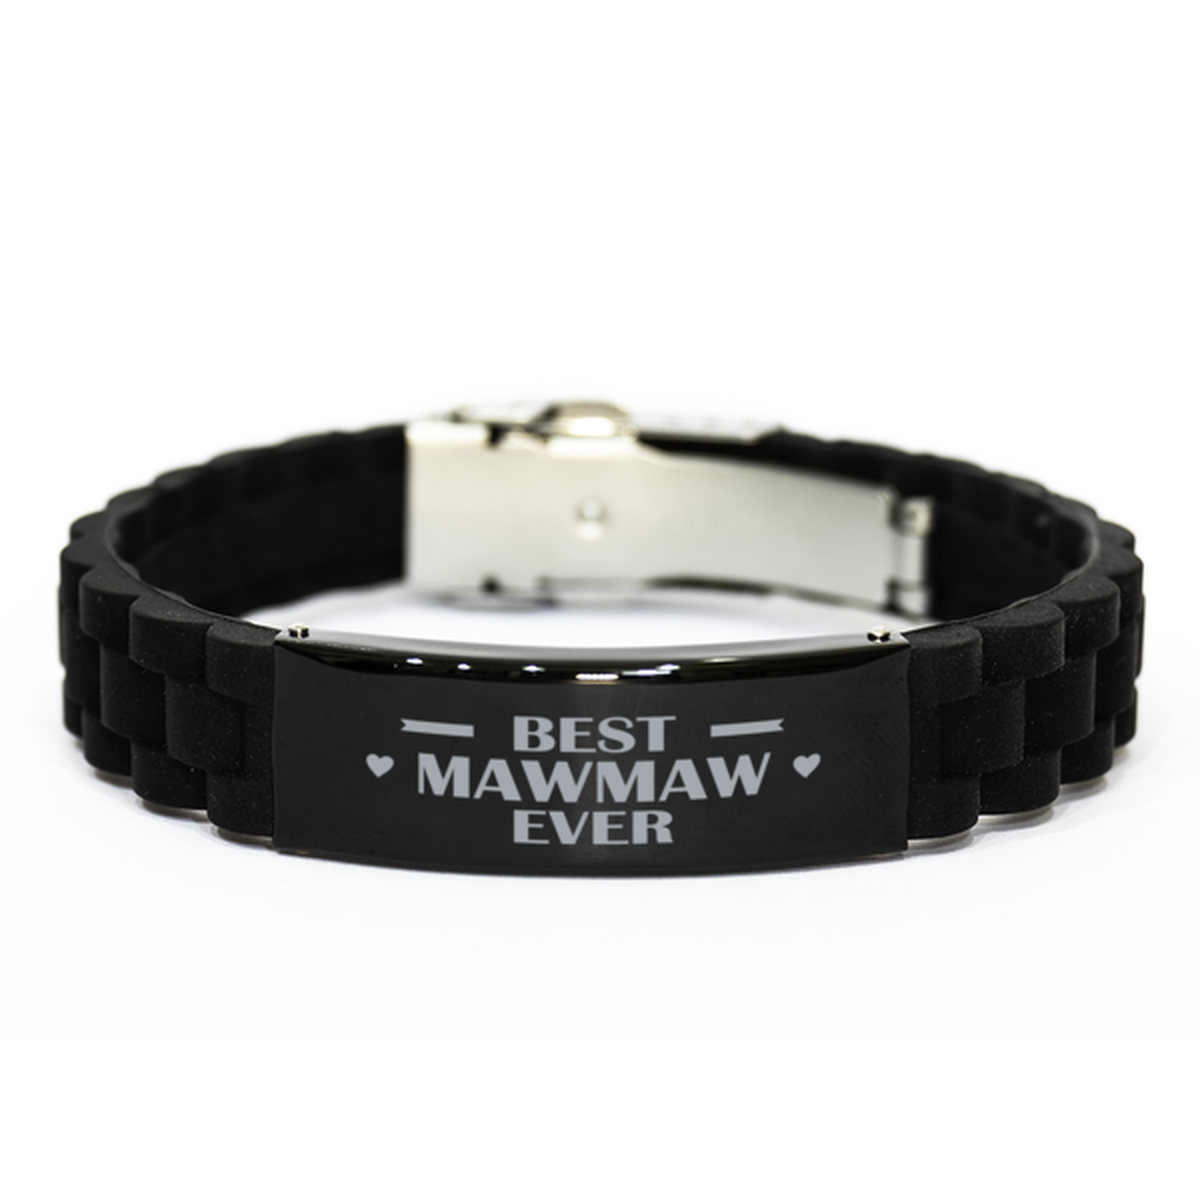 Best Mawmaw Ever Mawmaw Gifts, Funny Black Engraved Bracelet For Mawmaw, Family Gifts For Women